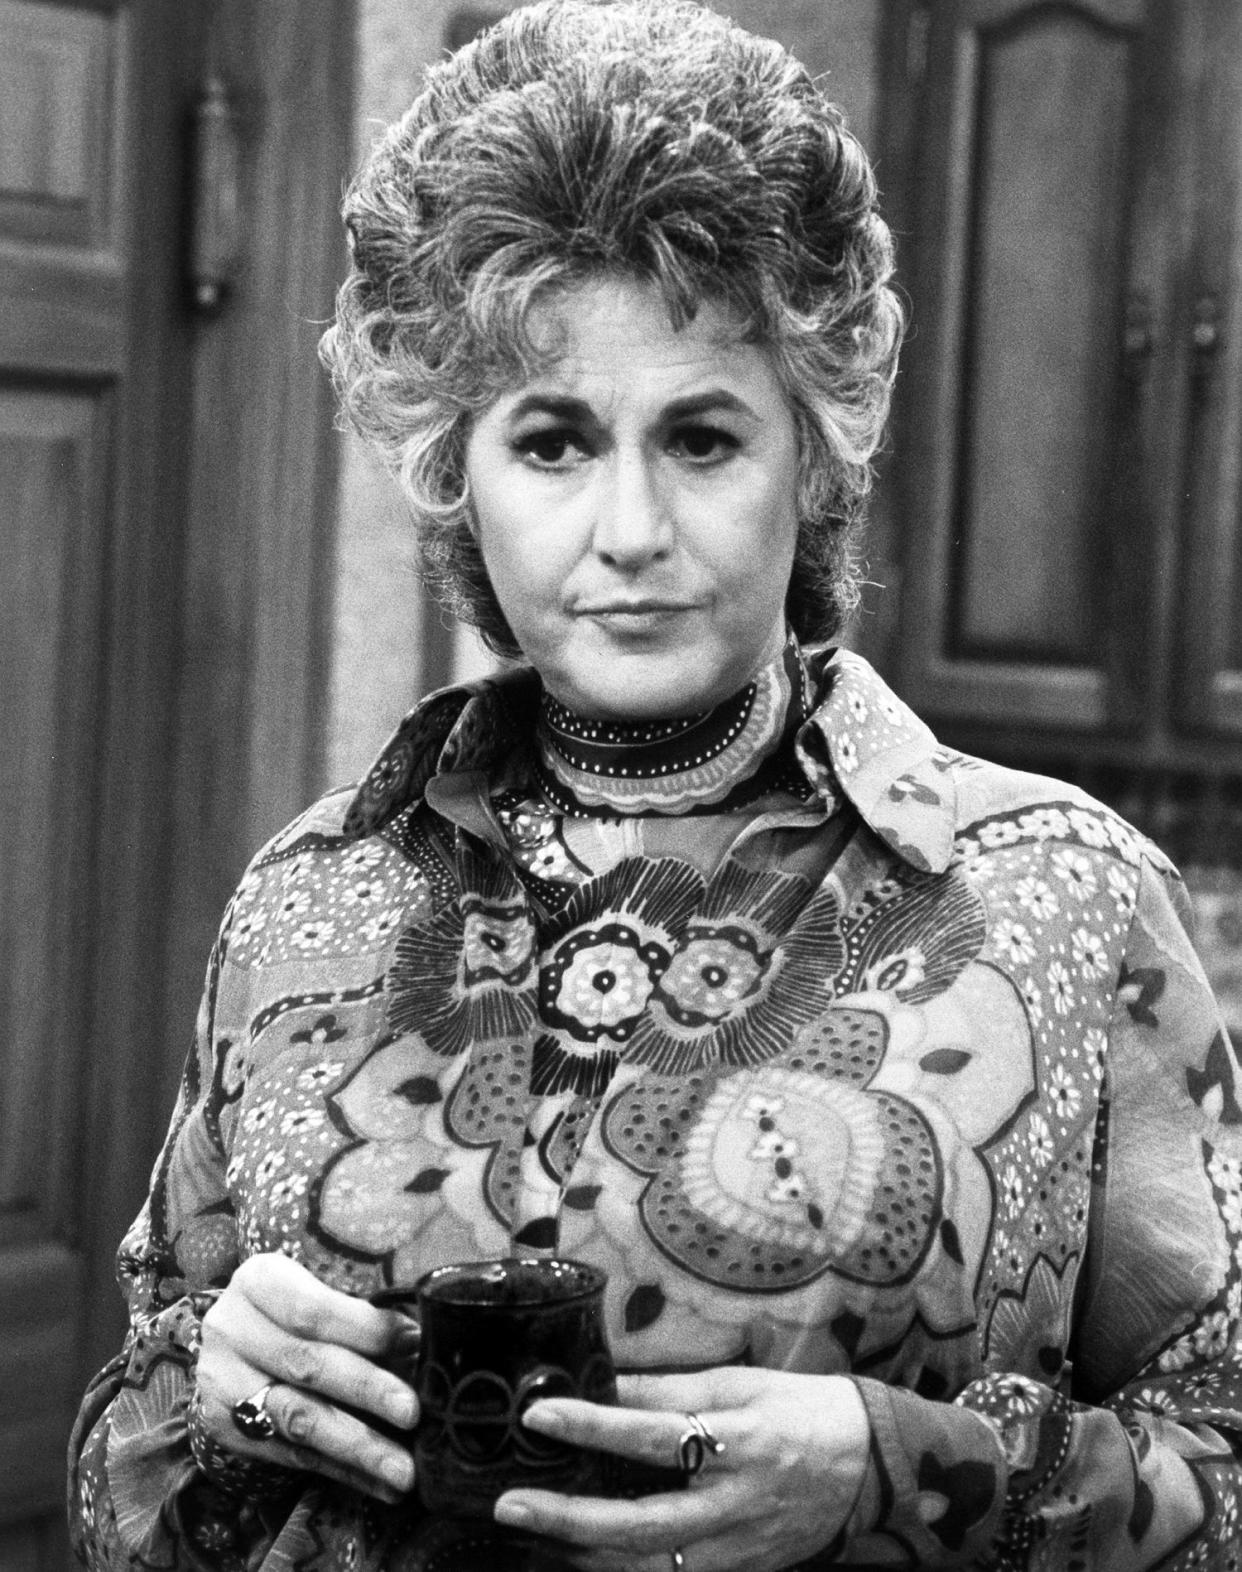 Bea Arthur as Maude in the show of the same name. (CBS via Getty Images)